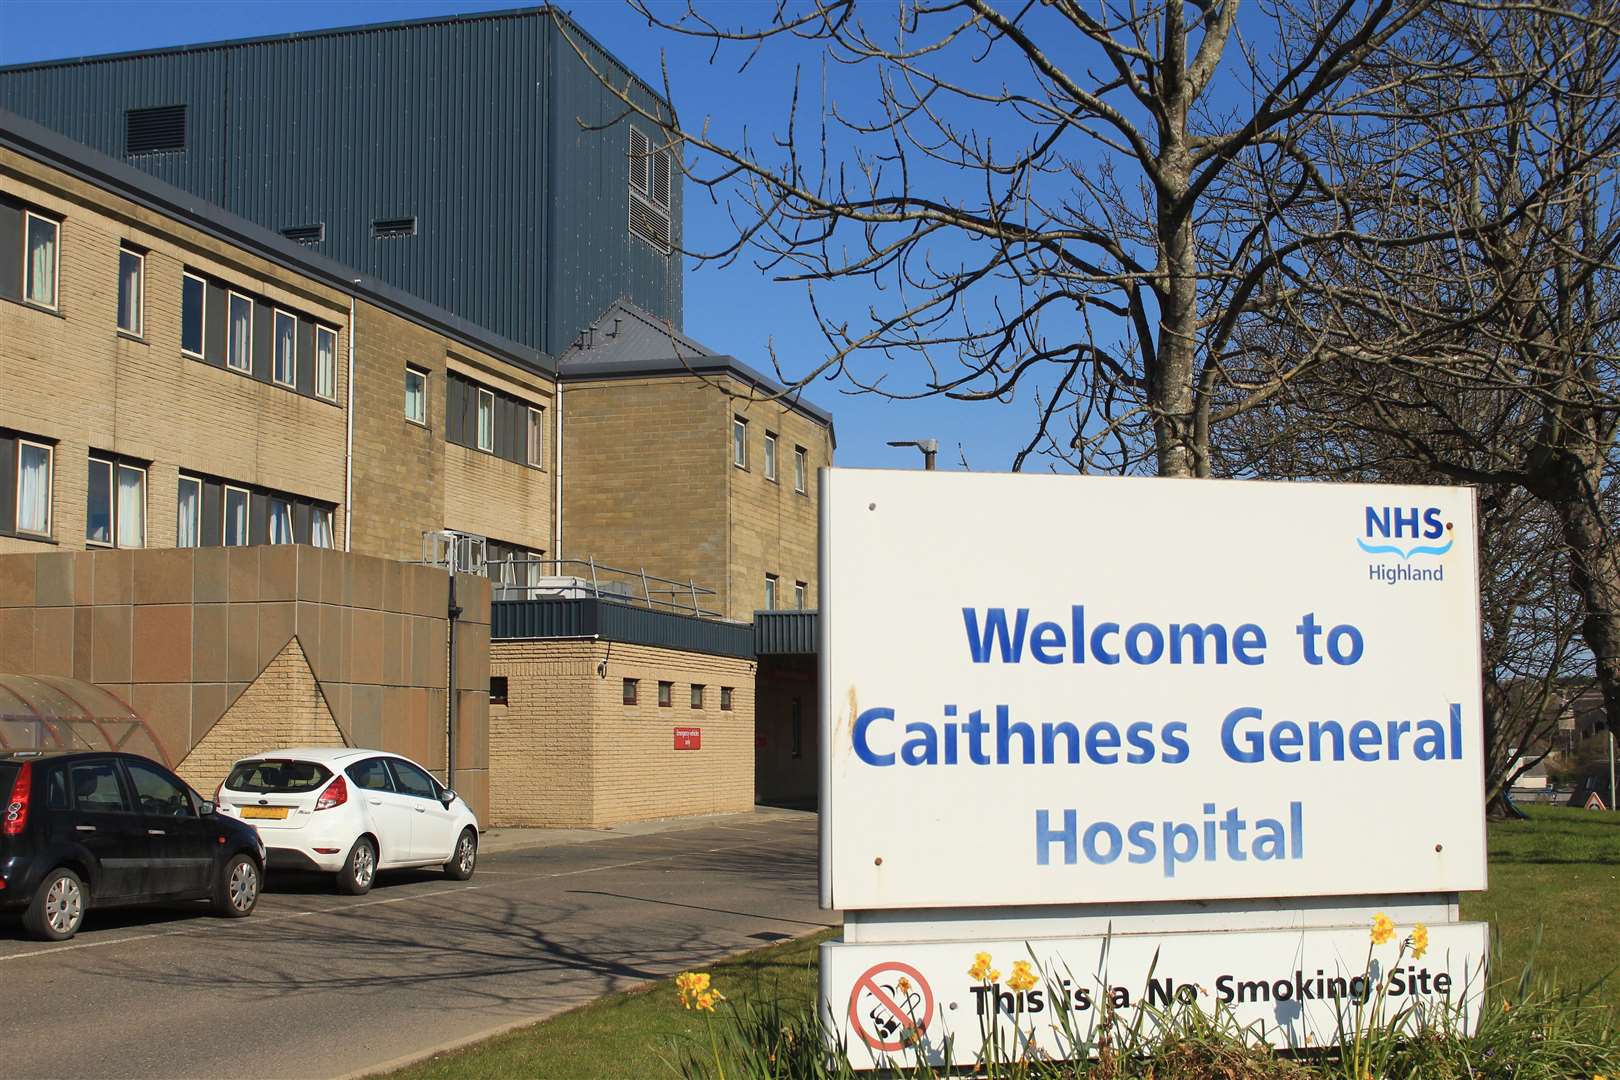 The wheelchairs were given to Caithness General Hospital in Wick.